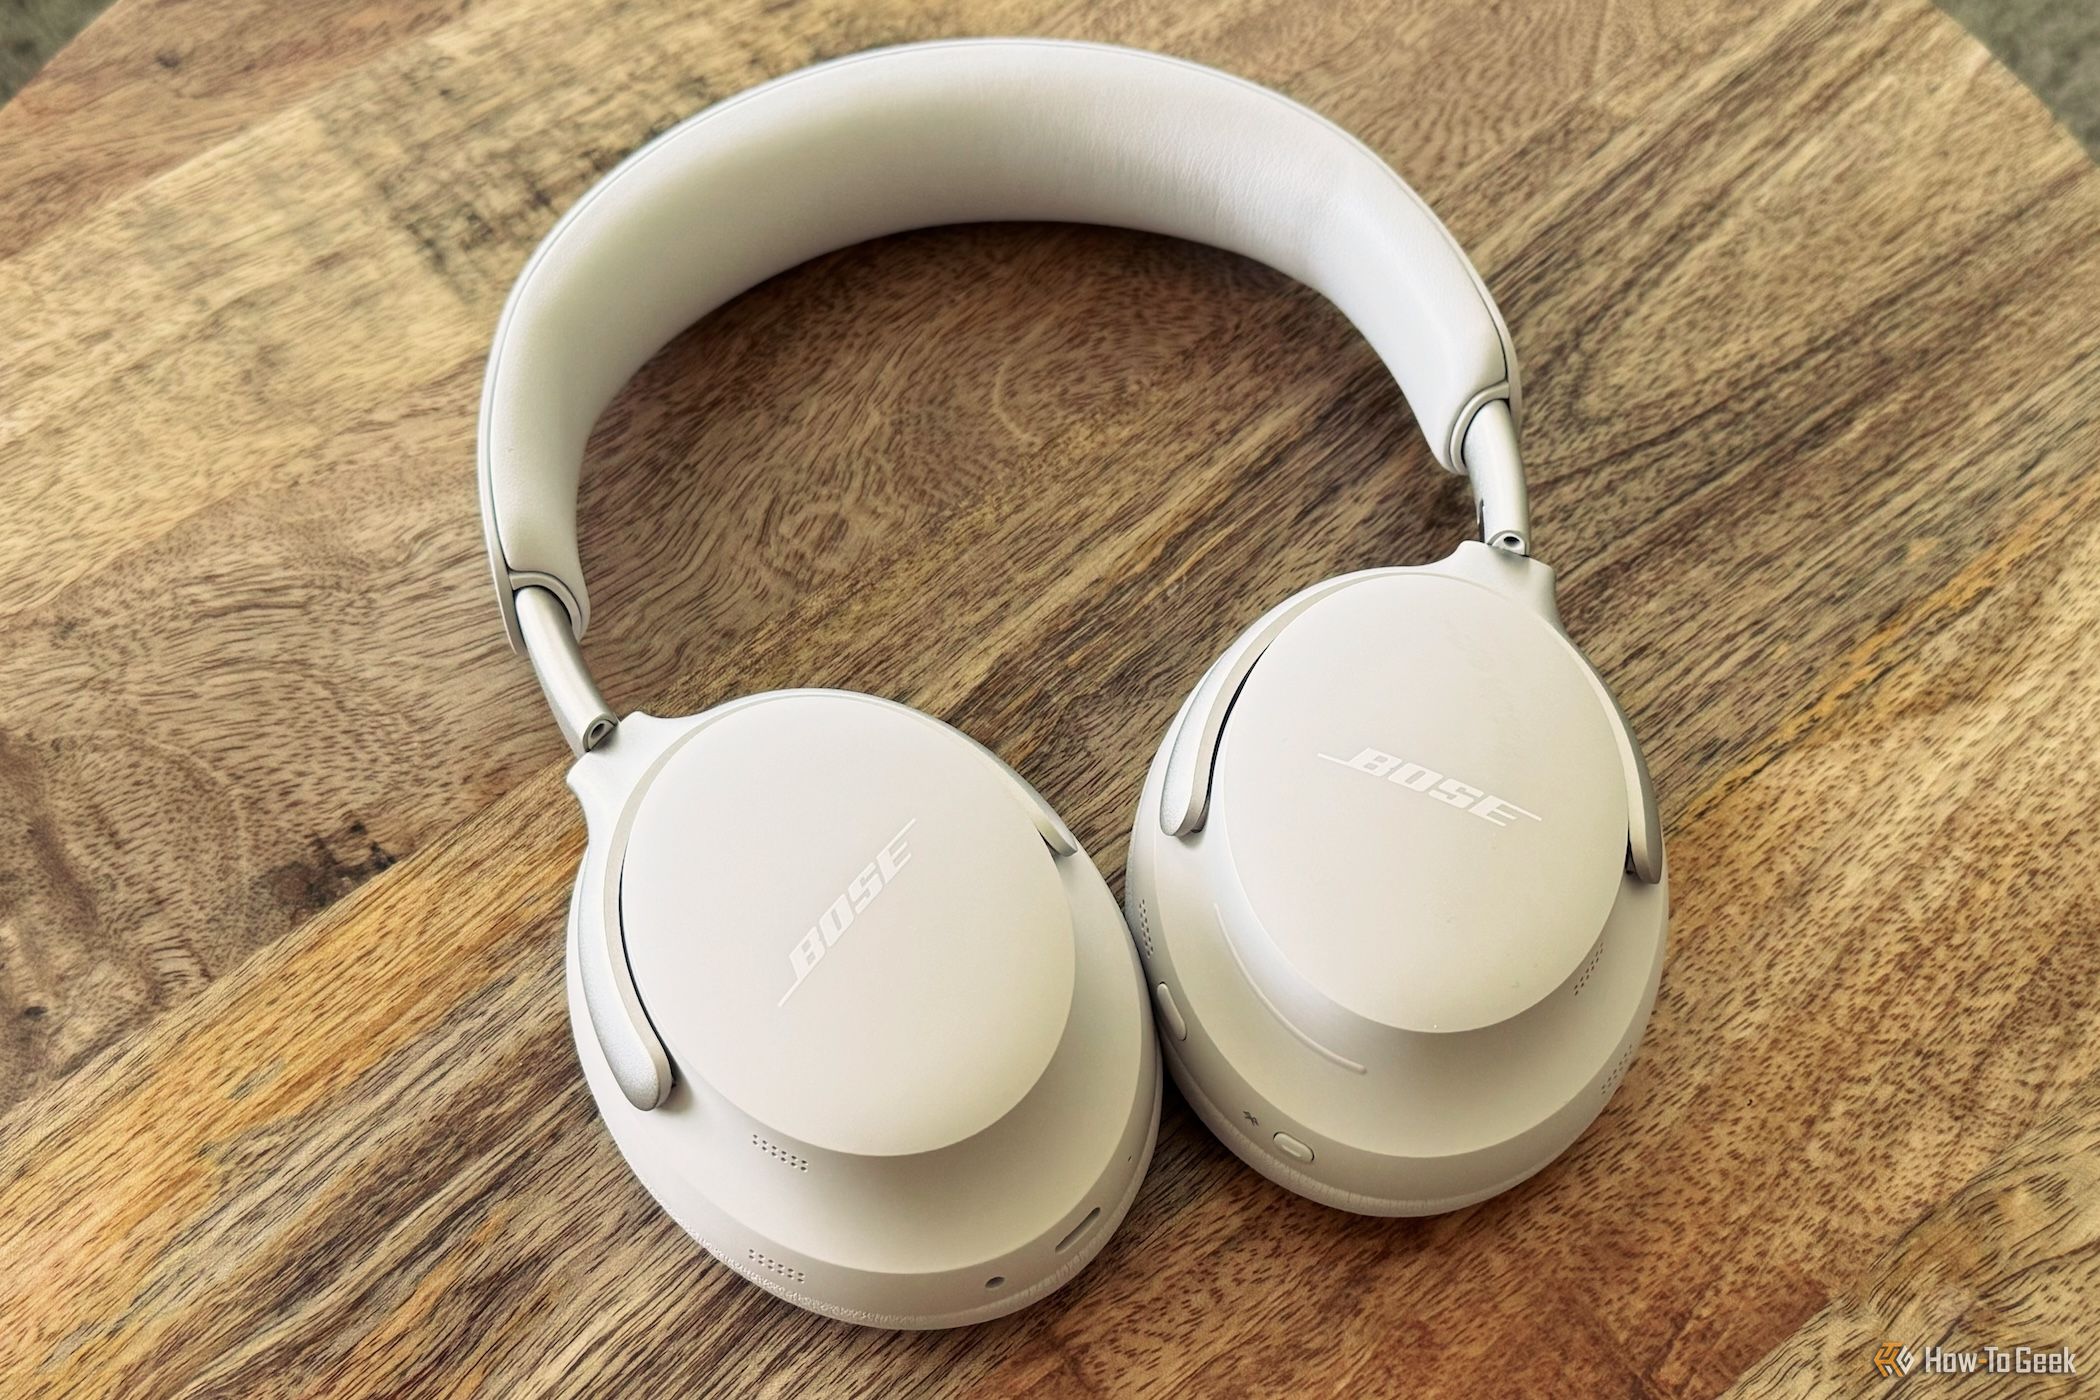 Bose QuietComfort Ultra Headphones Review: A Great Travel Companion